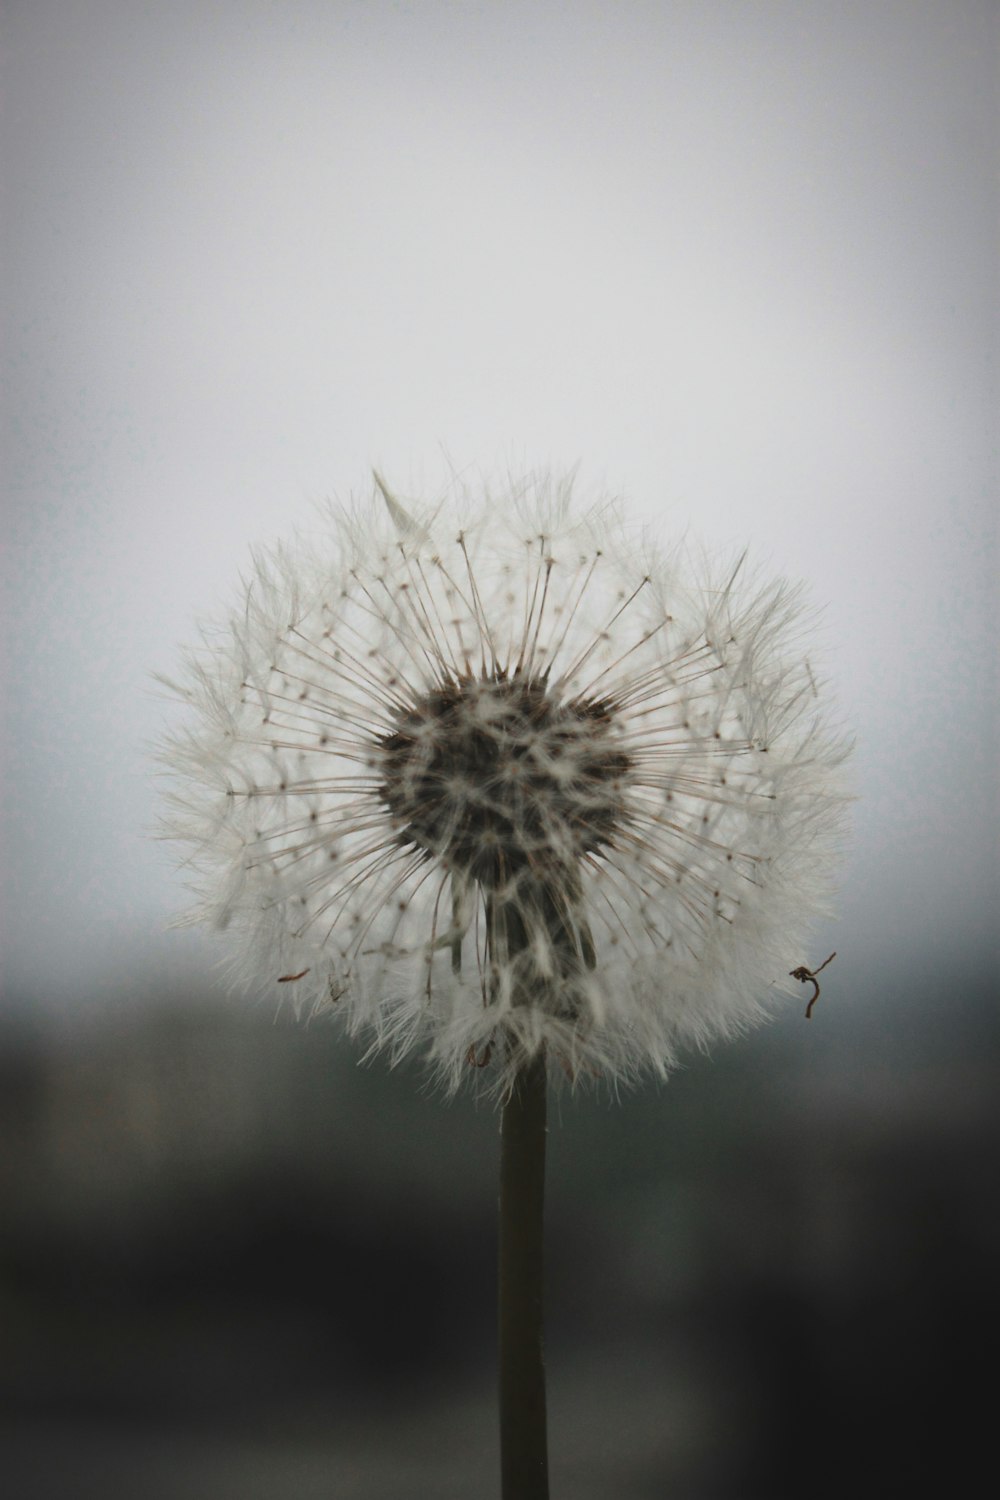 a dandelion in the foreground with a blurry background